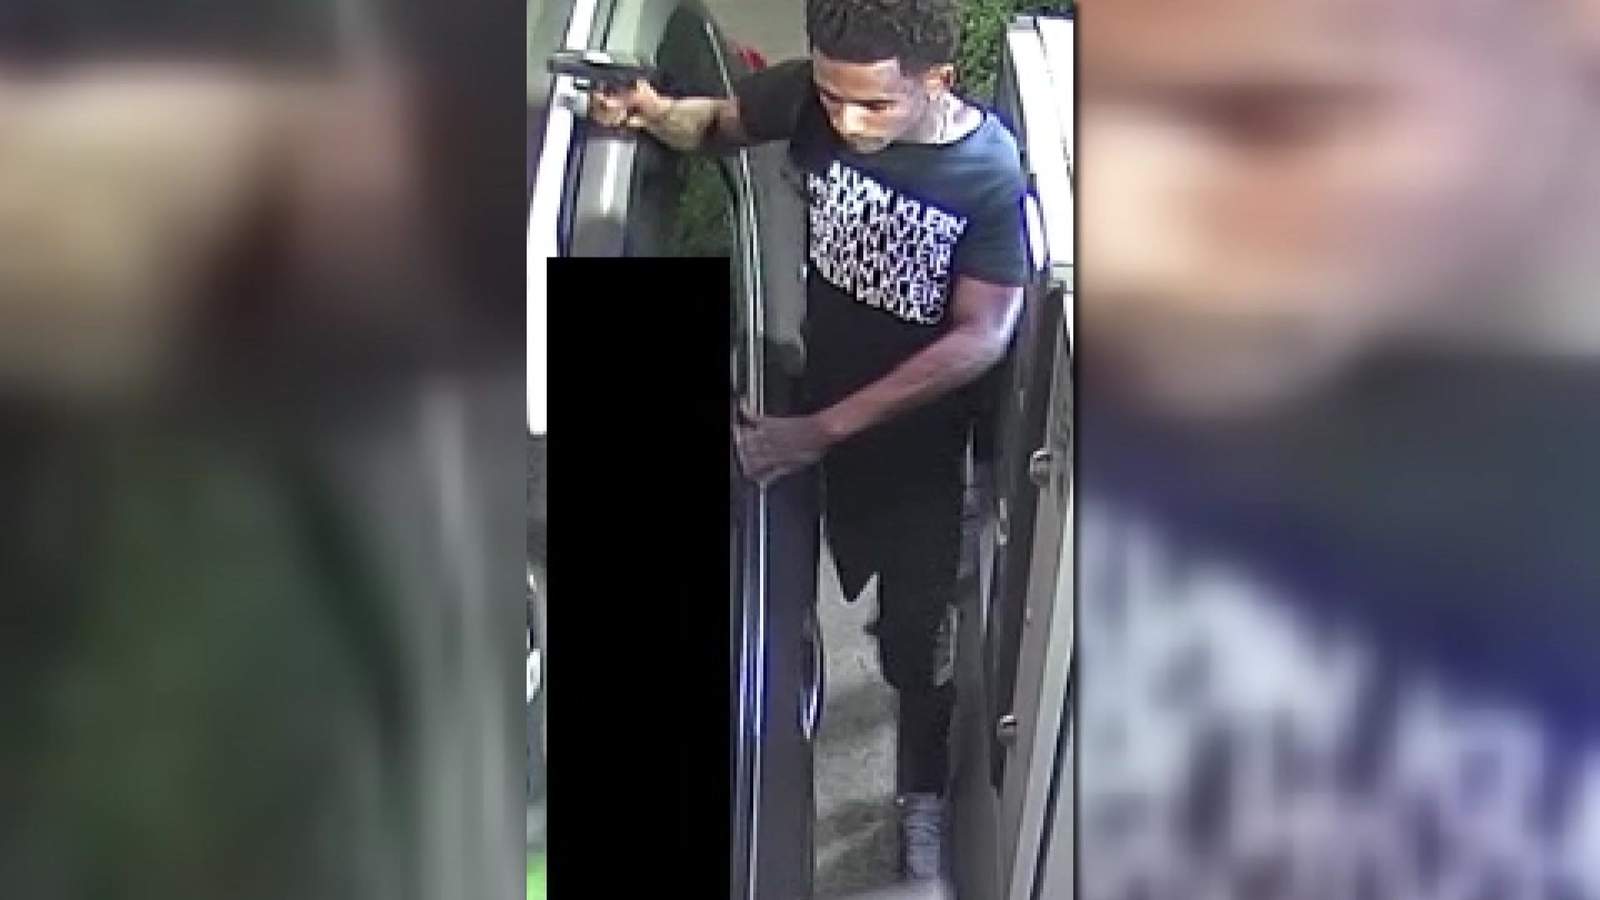 Bellaire police search for suspect after man pistol-whipped, robbed at ATM Sunday